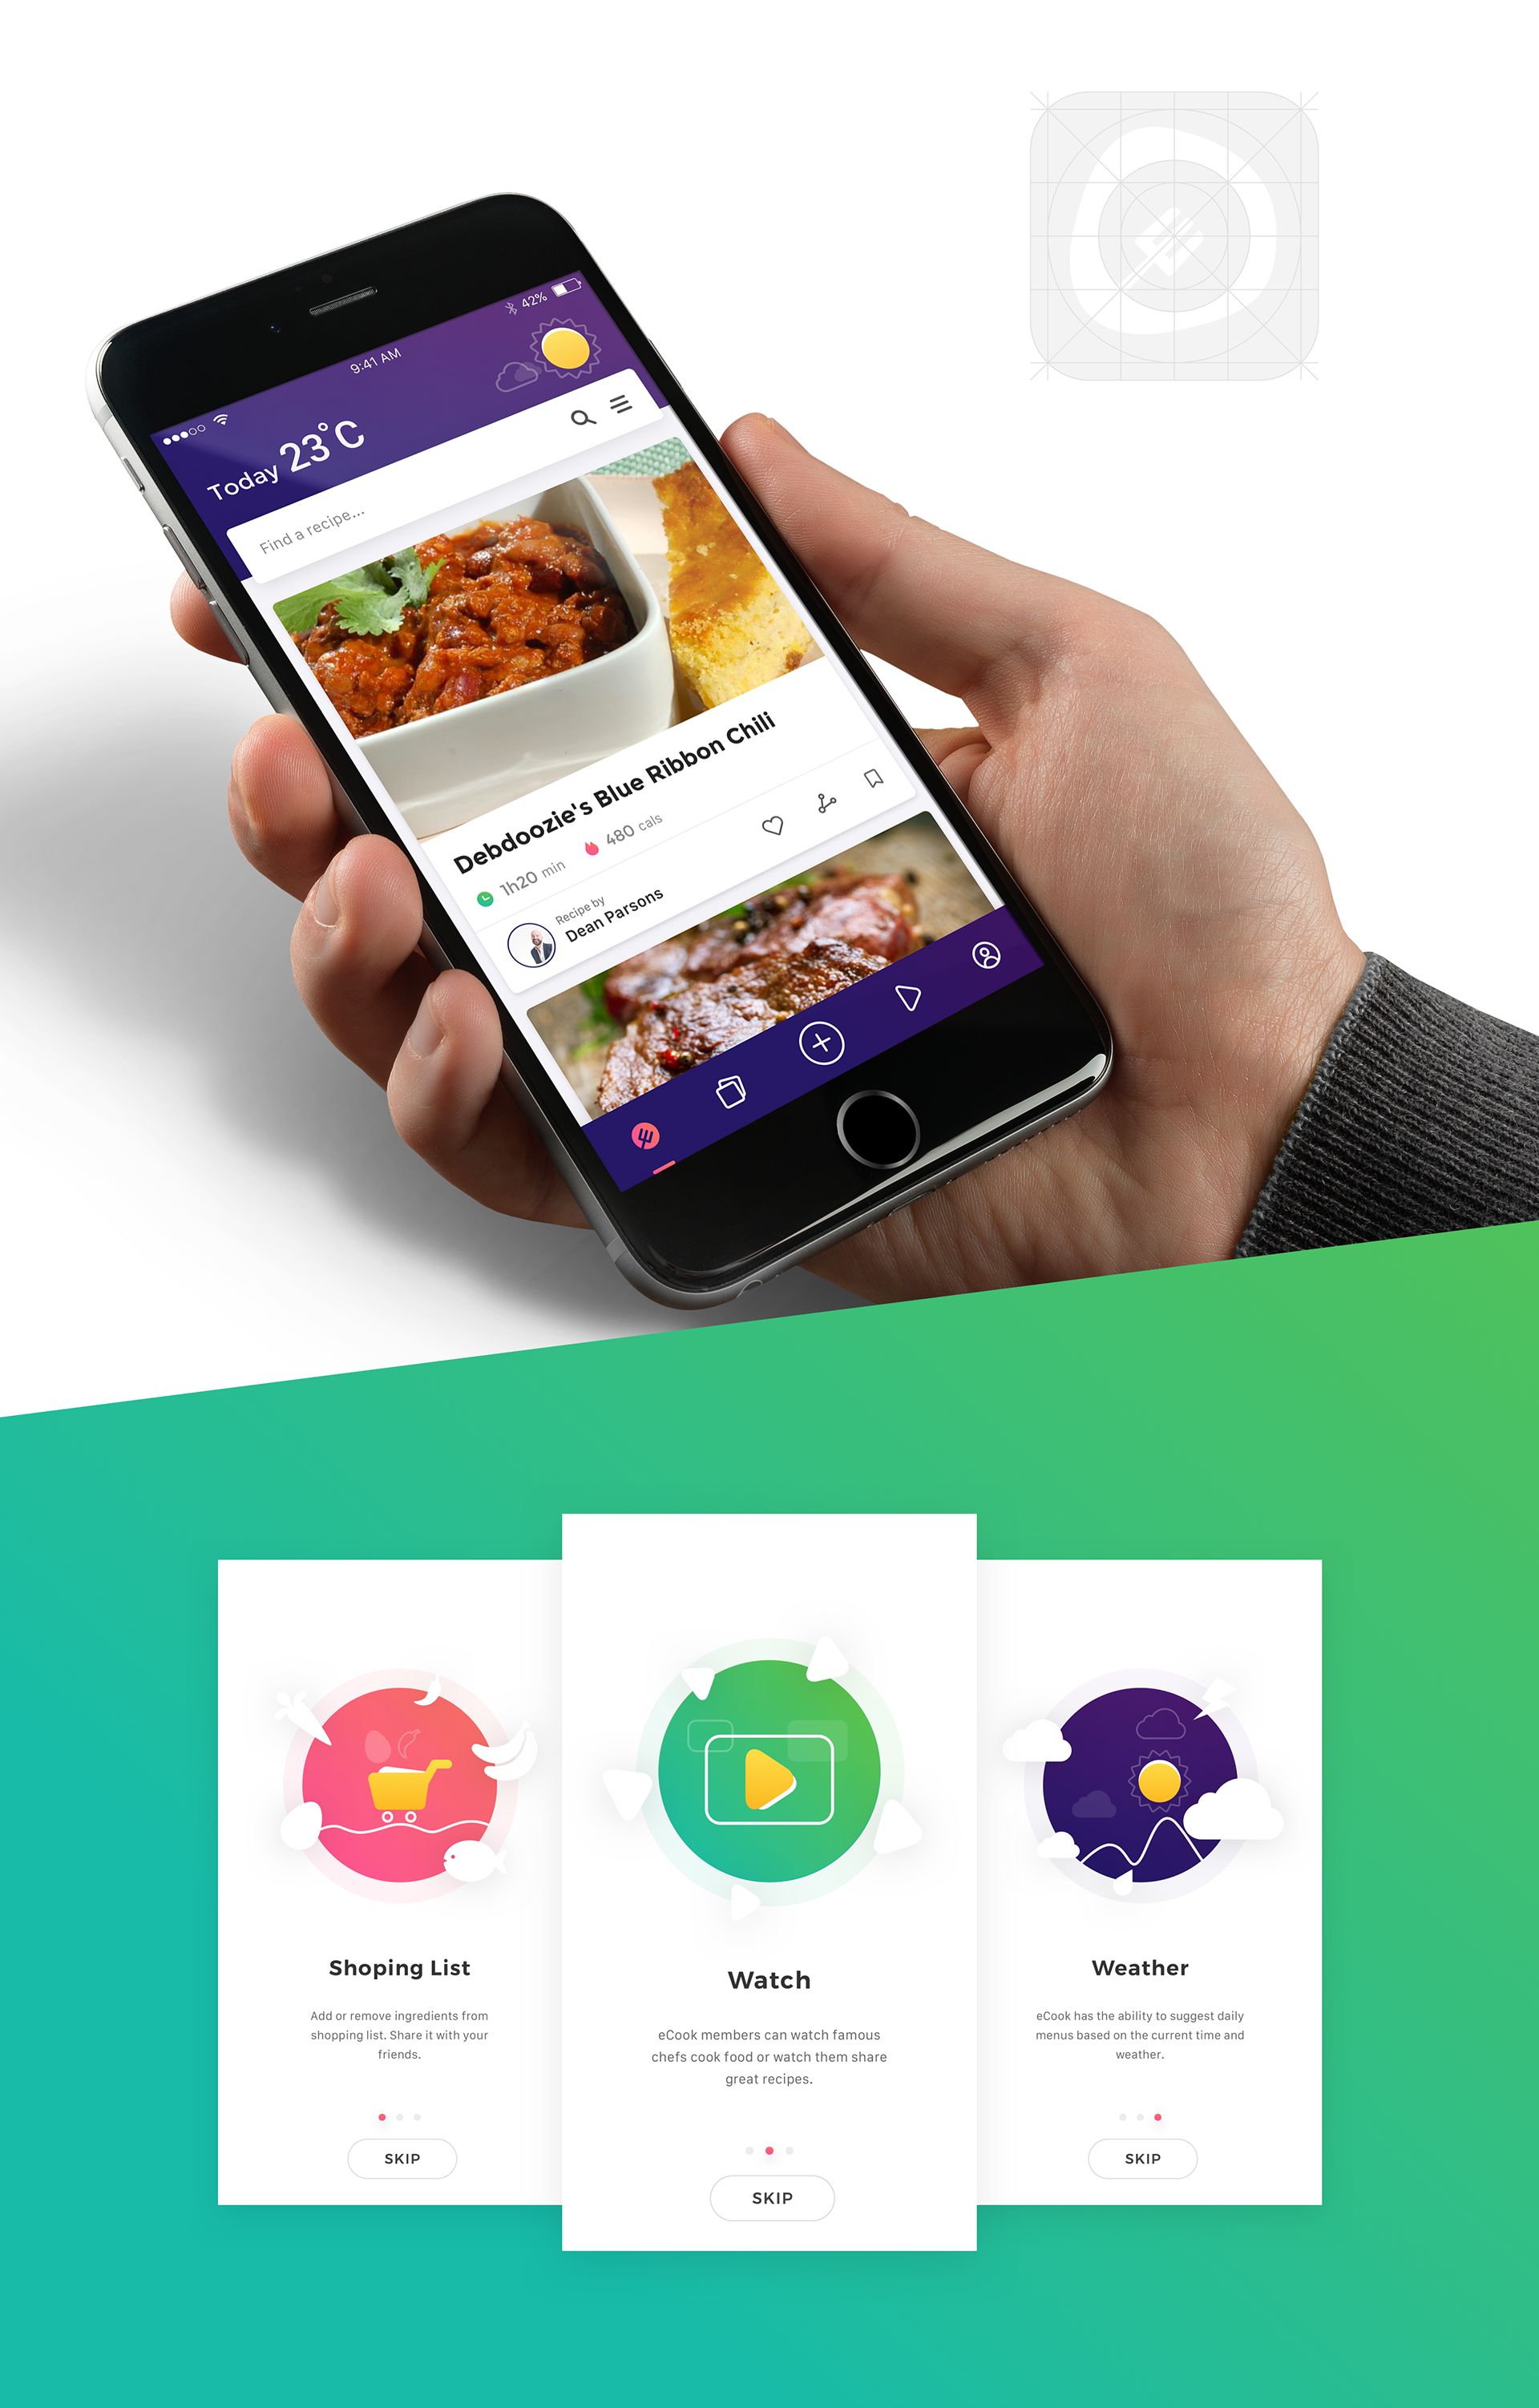 Interaction Design & UI/UX of the Ecook App Concept